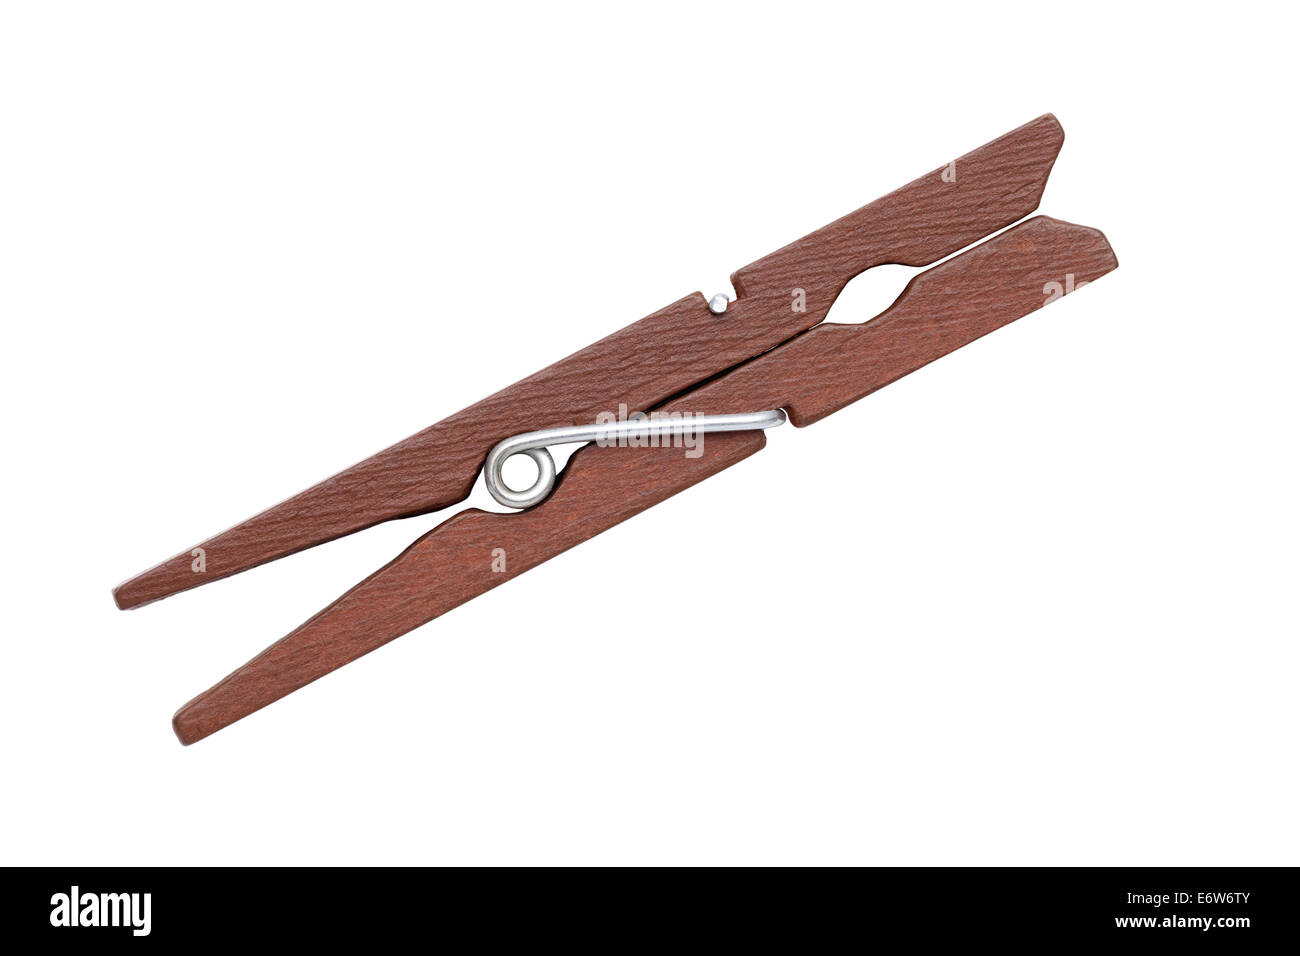 Clothespins wood Cut Out Stock Images & Pictures - Alamy